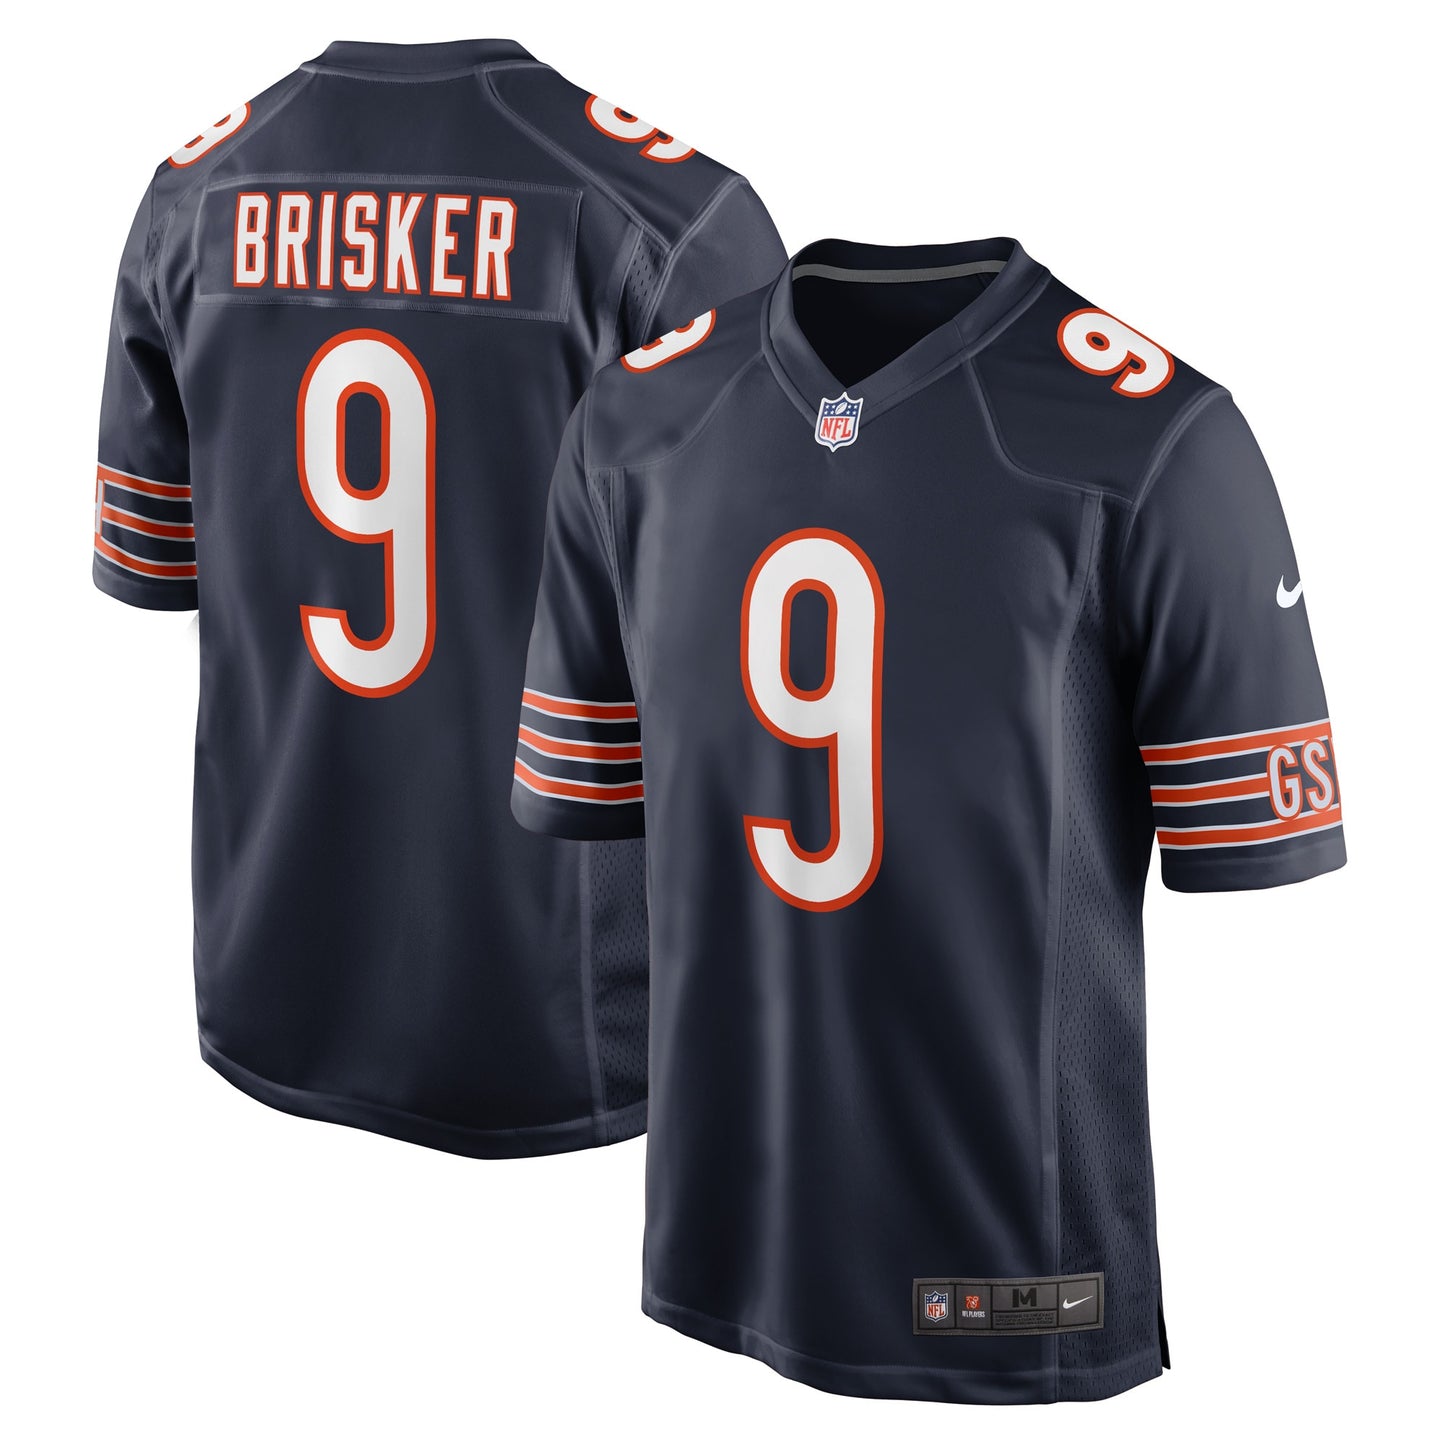 Jaquan Brisker Chicago Bears Nike Game Player Jersey - Navy